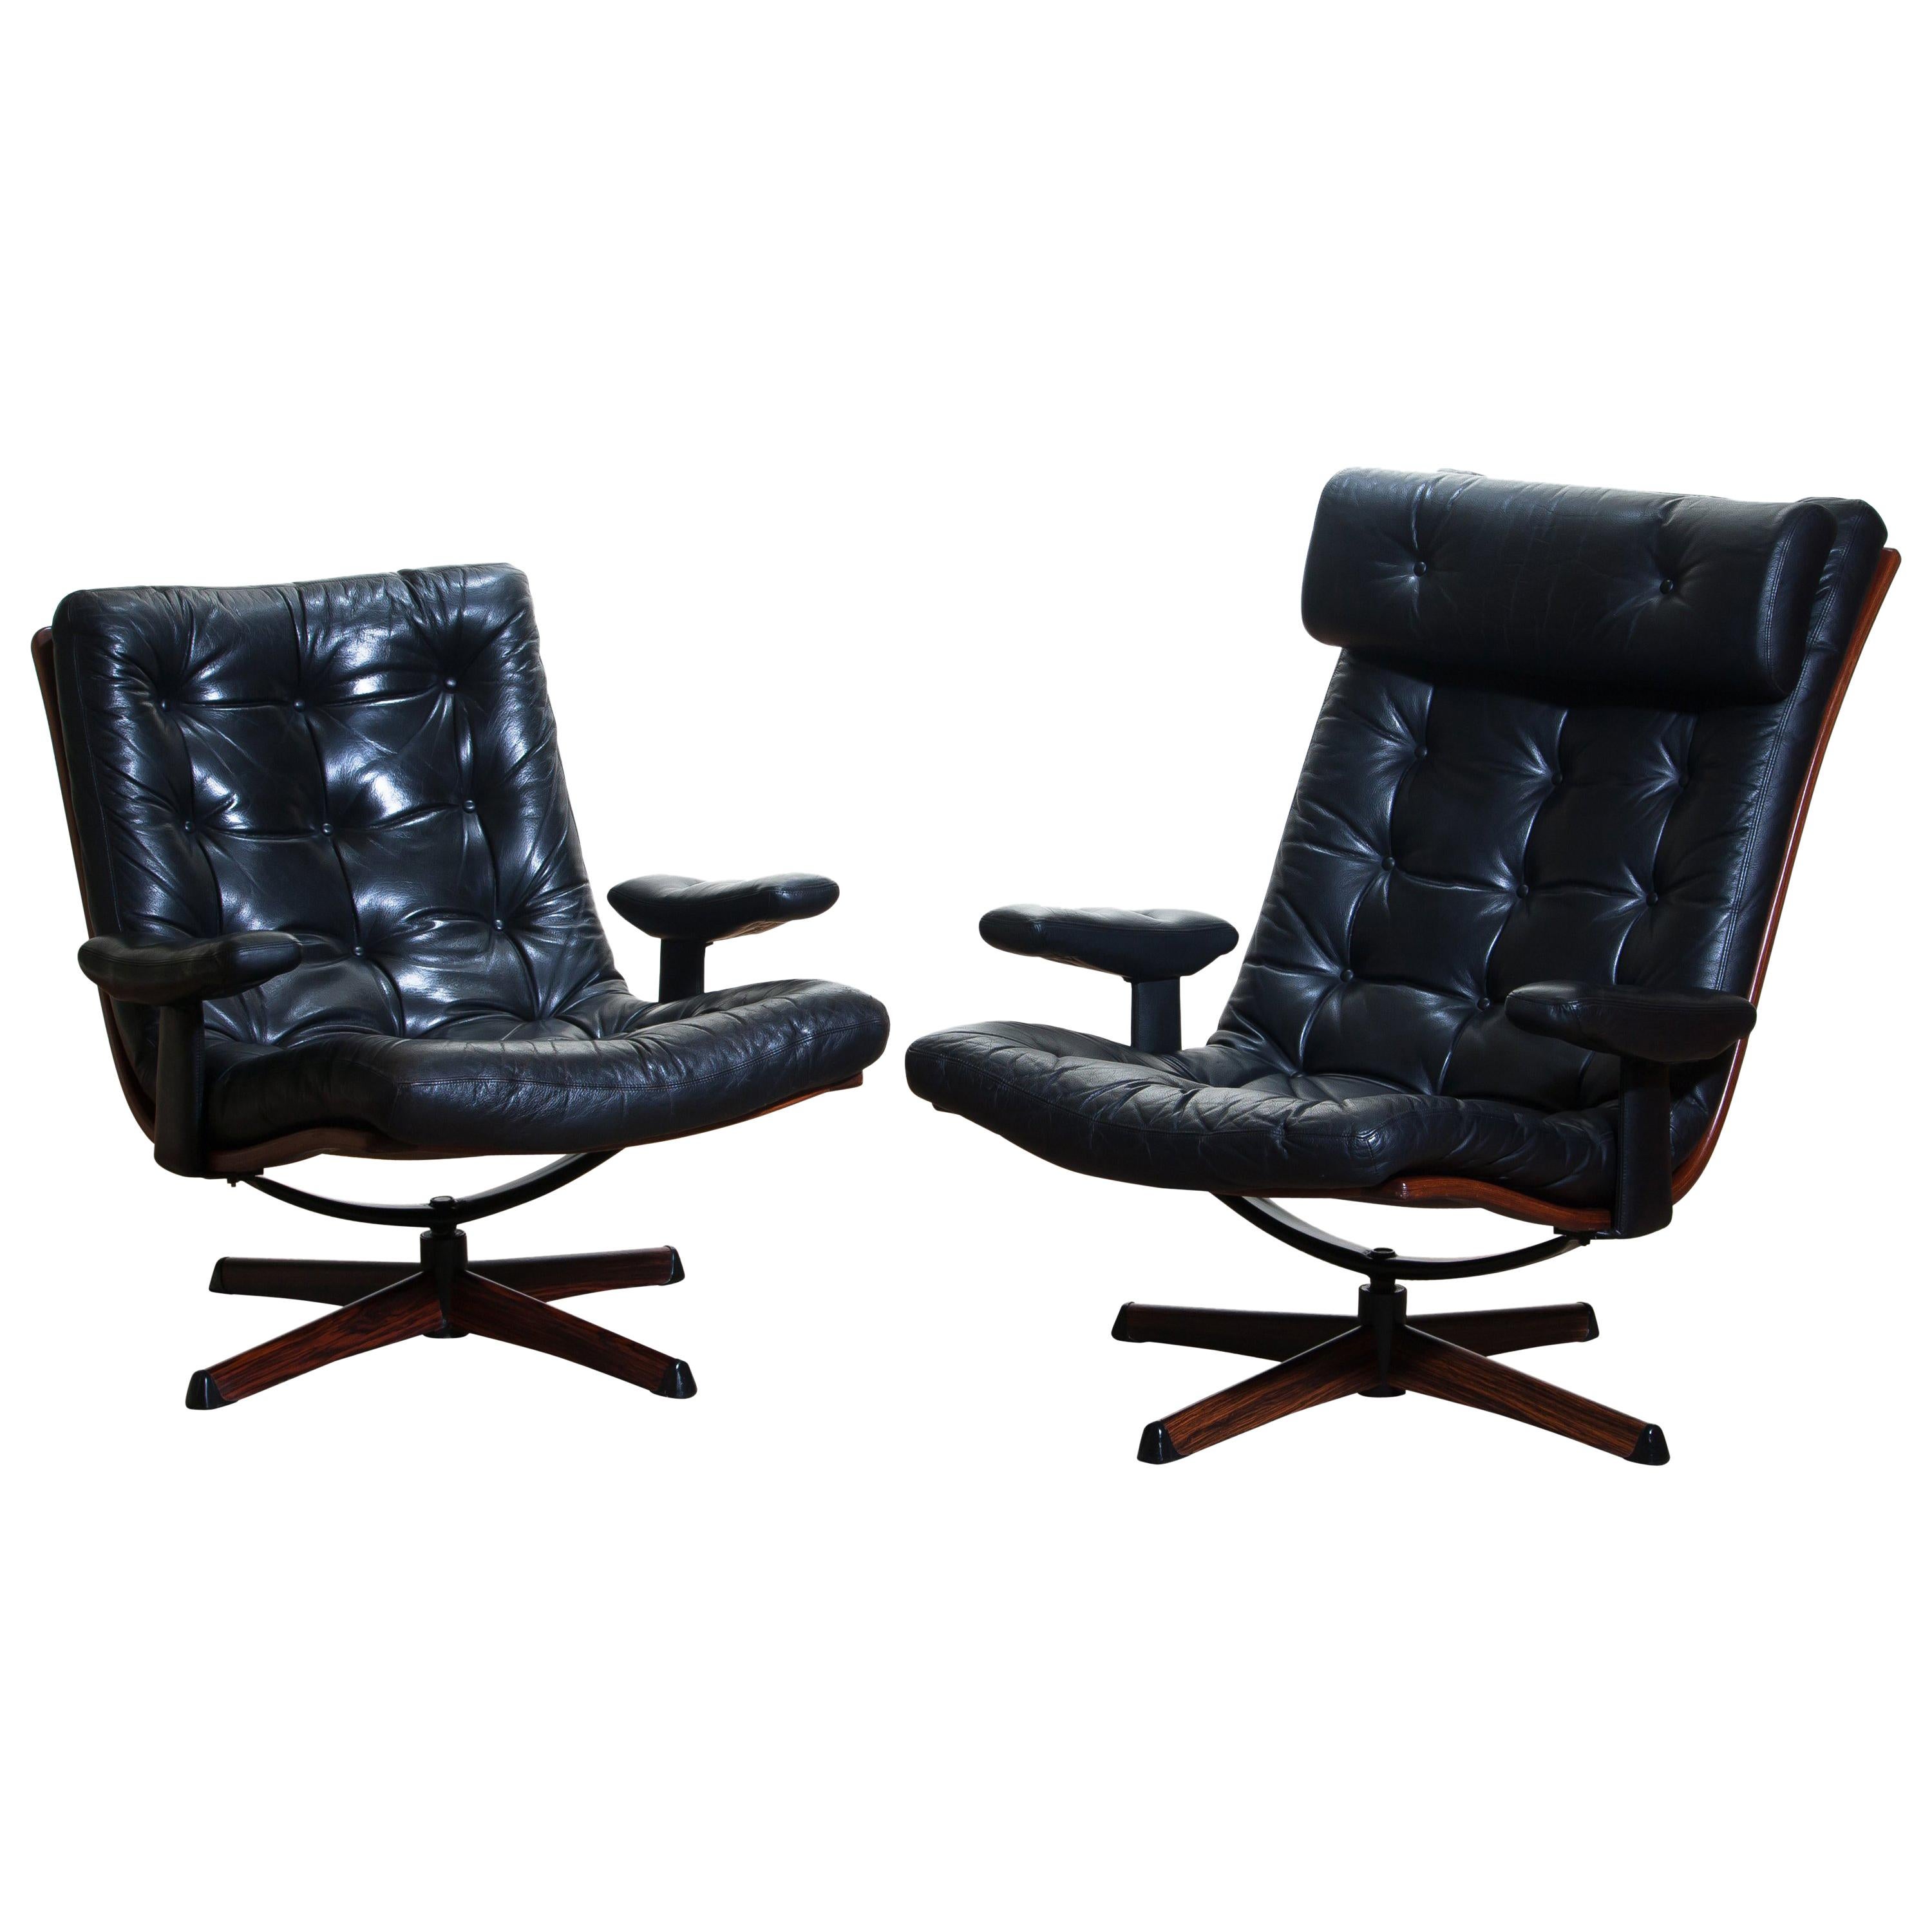 gote mobler swivel chair